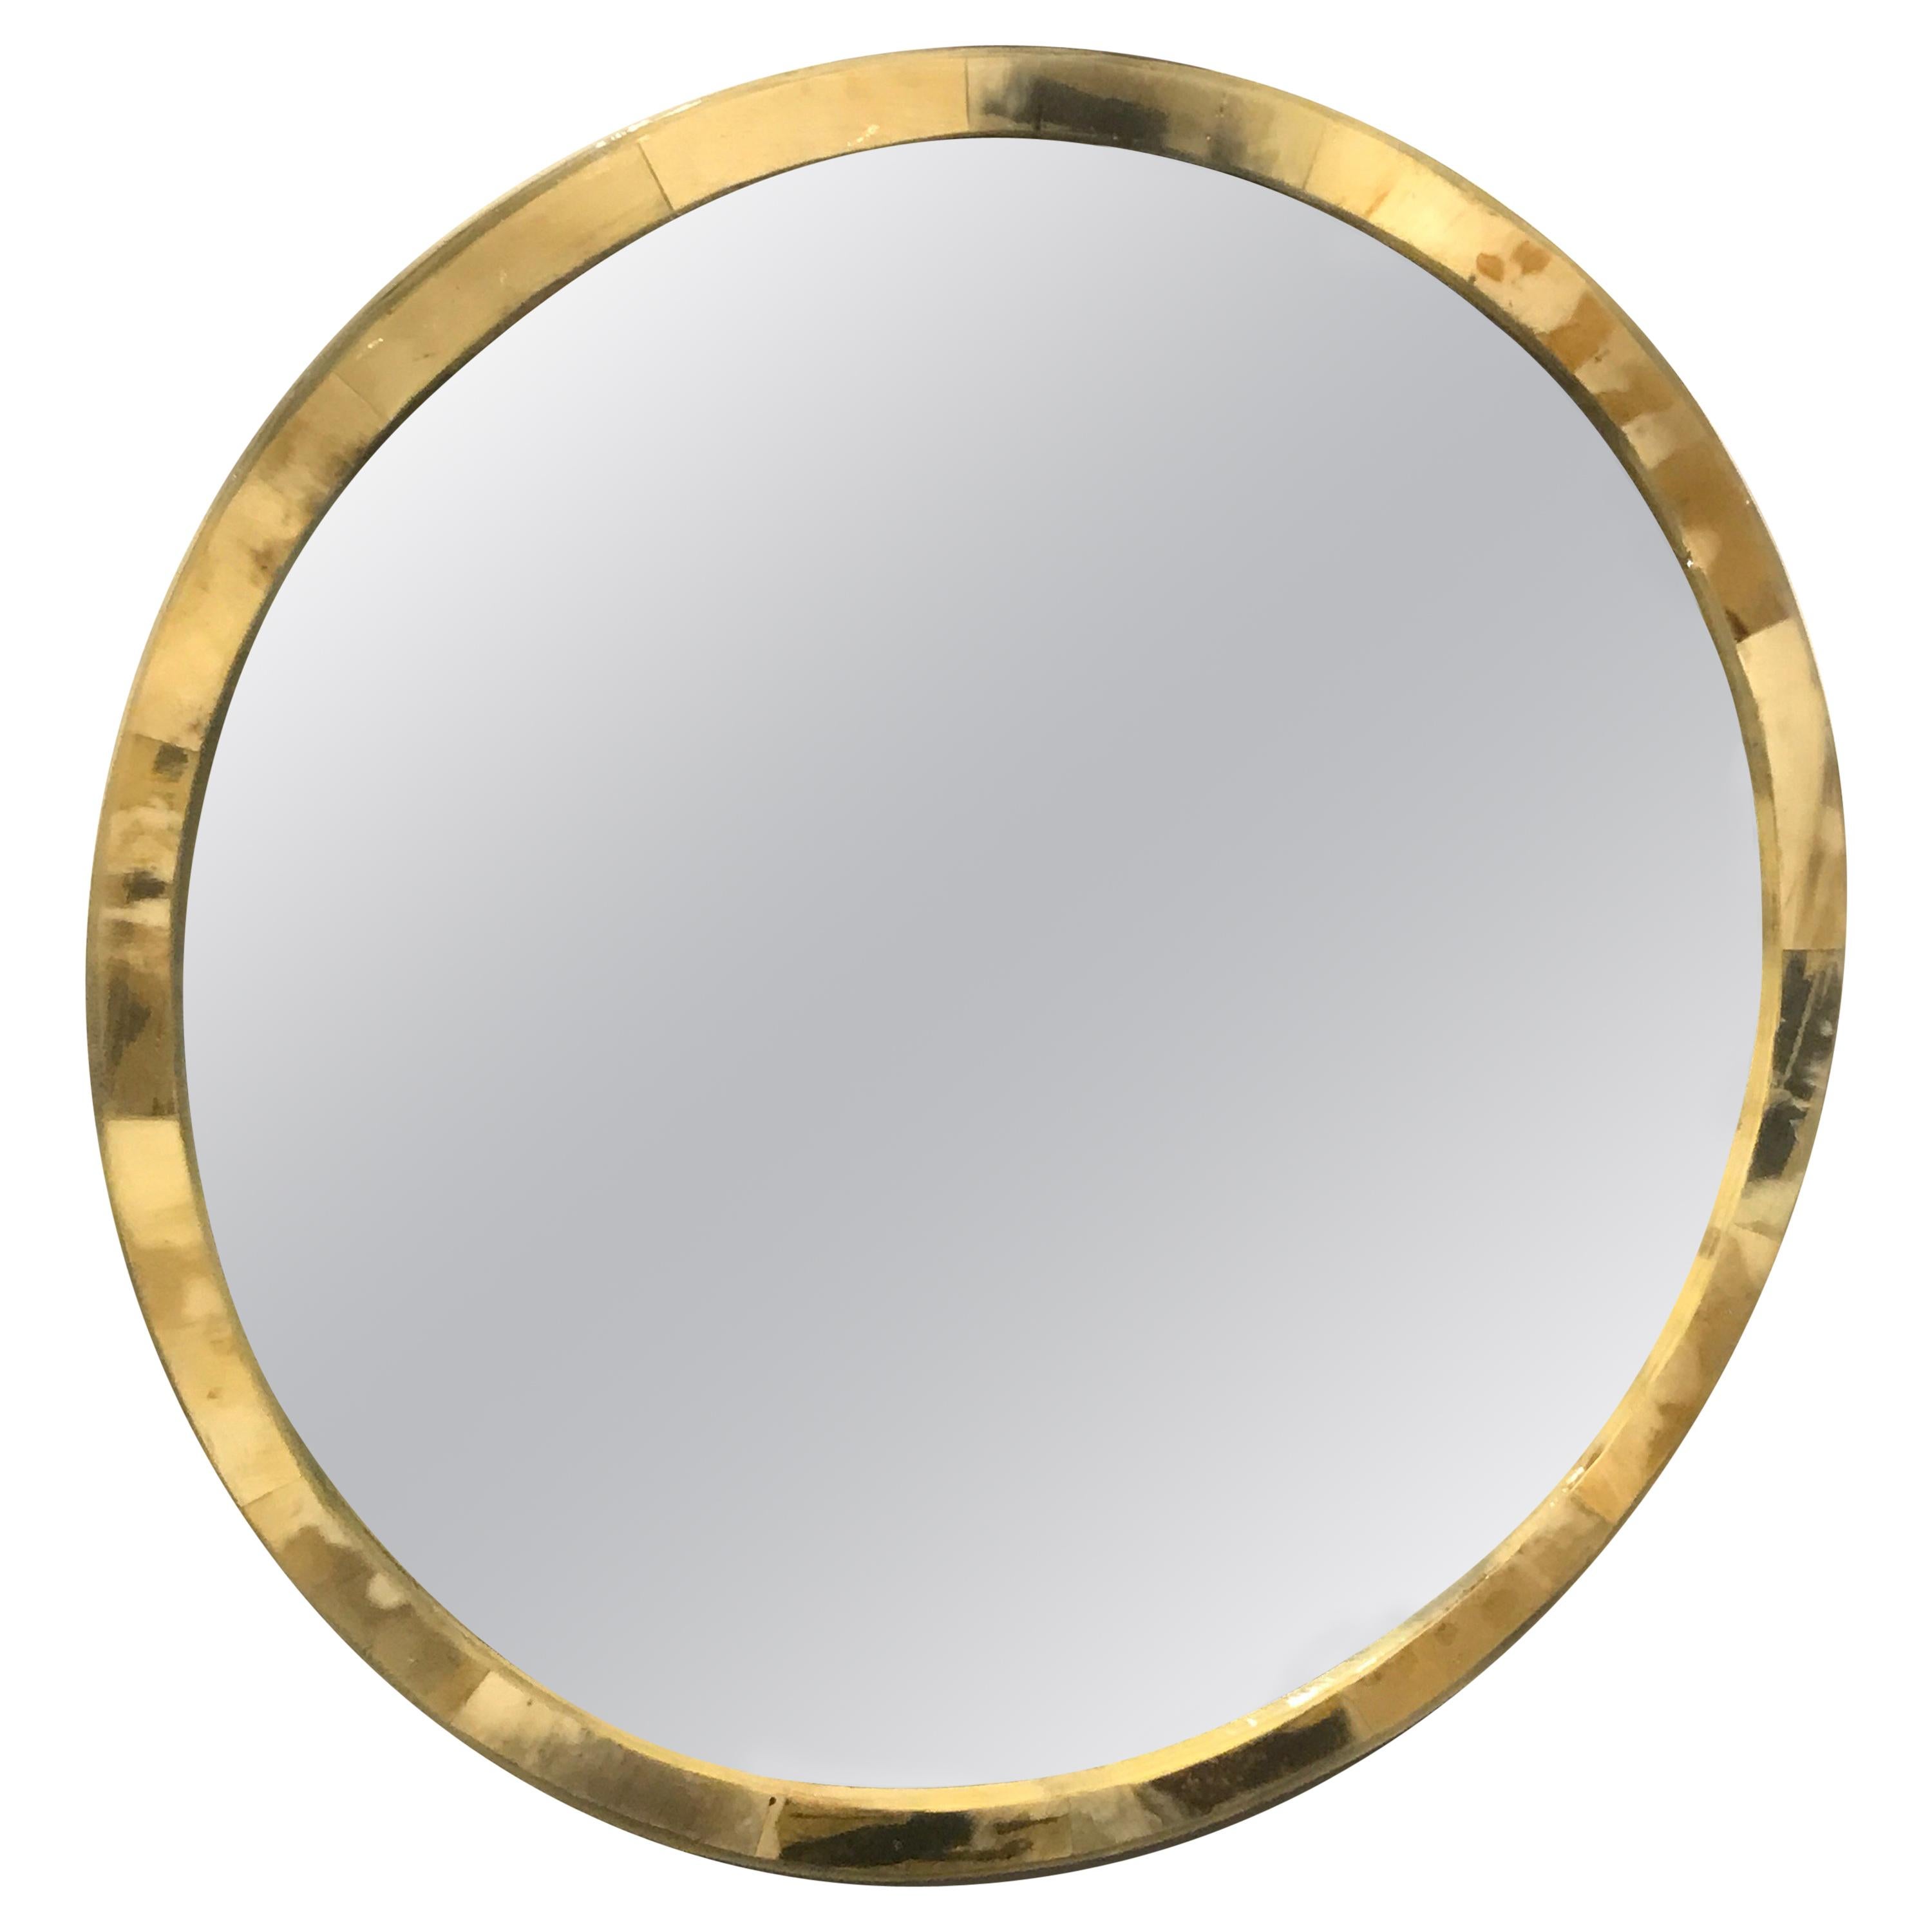 Polished Horn Circular Wall Mirror For Sale